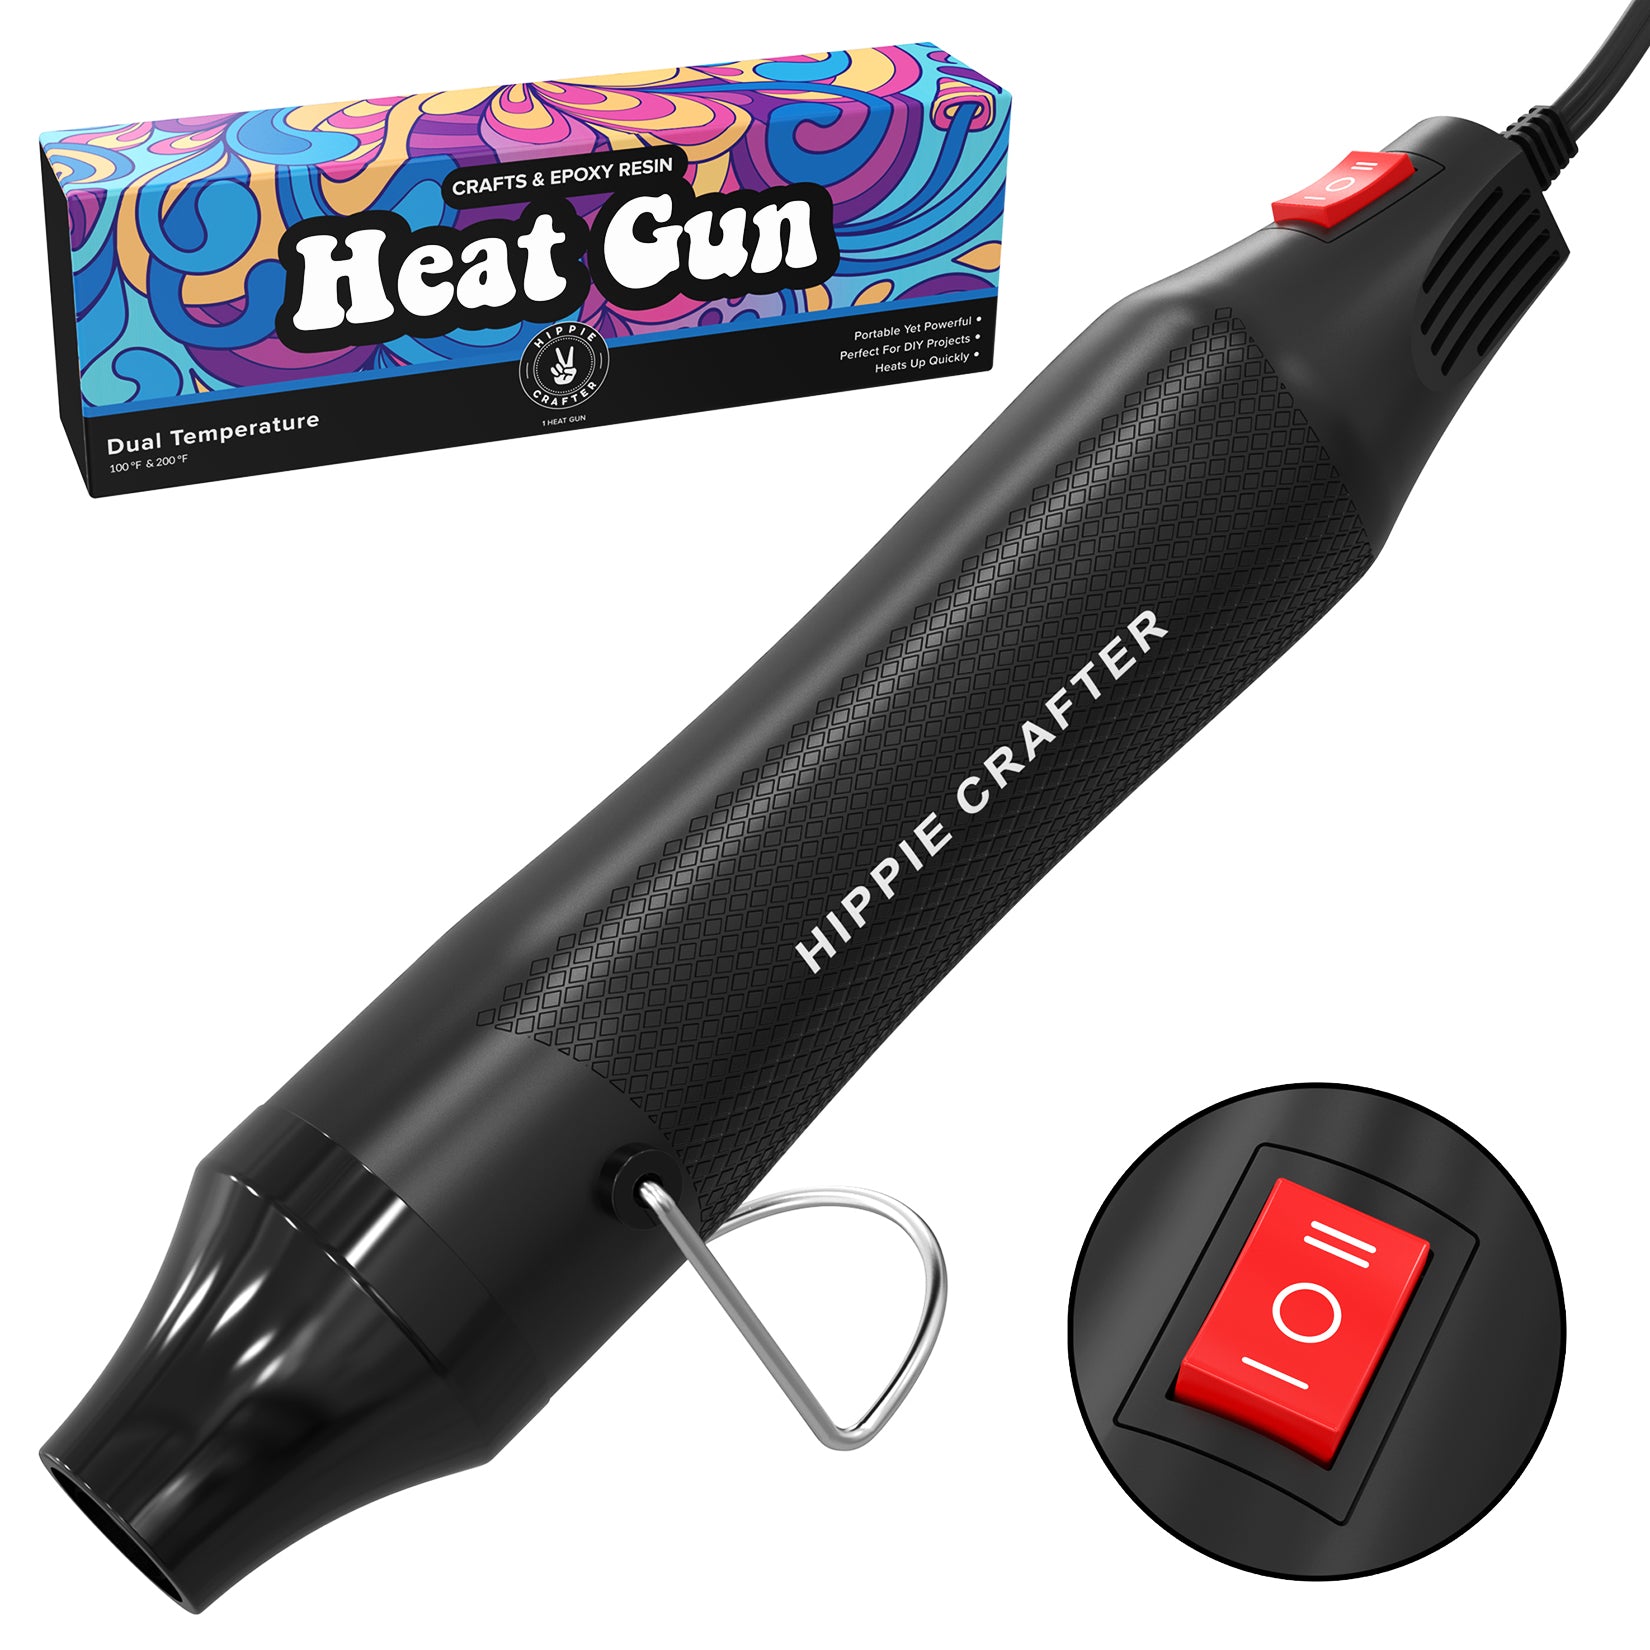 Best Heat Gun For Crafts  Top 10 Heat Guns For Crafting And